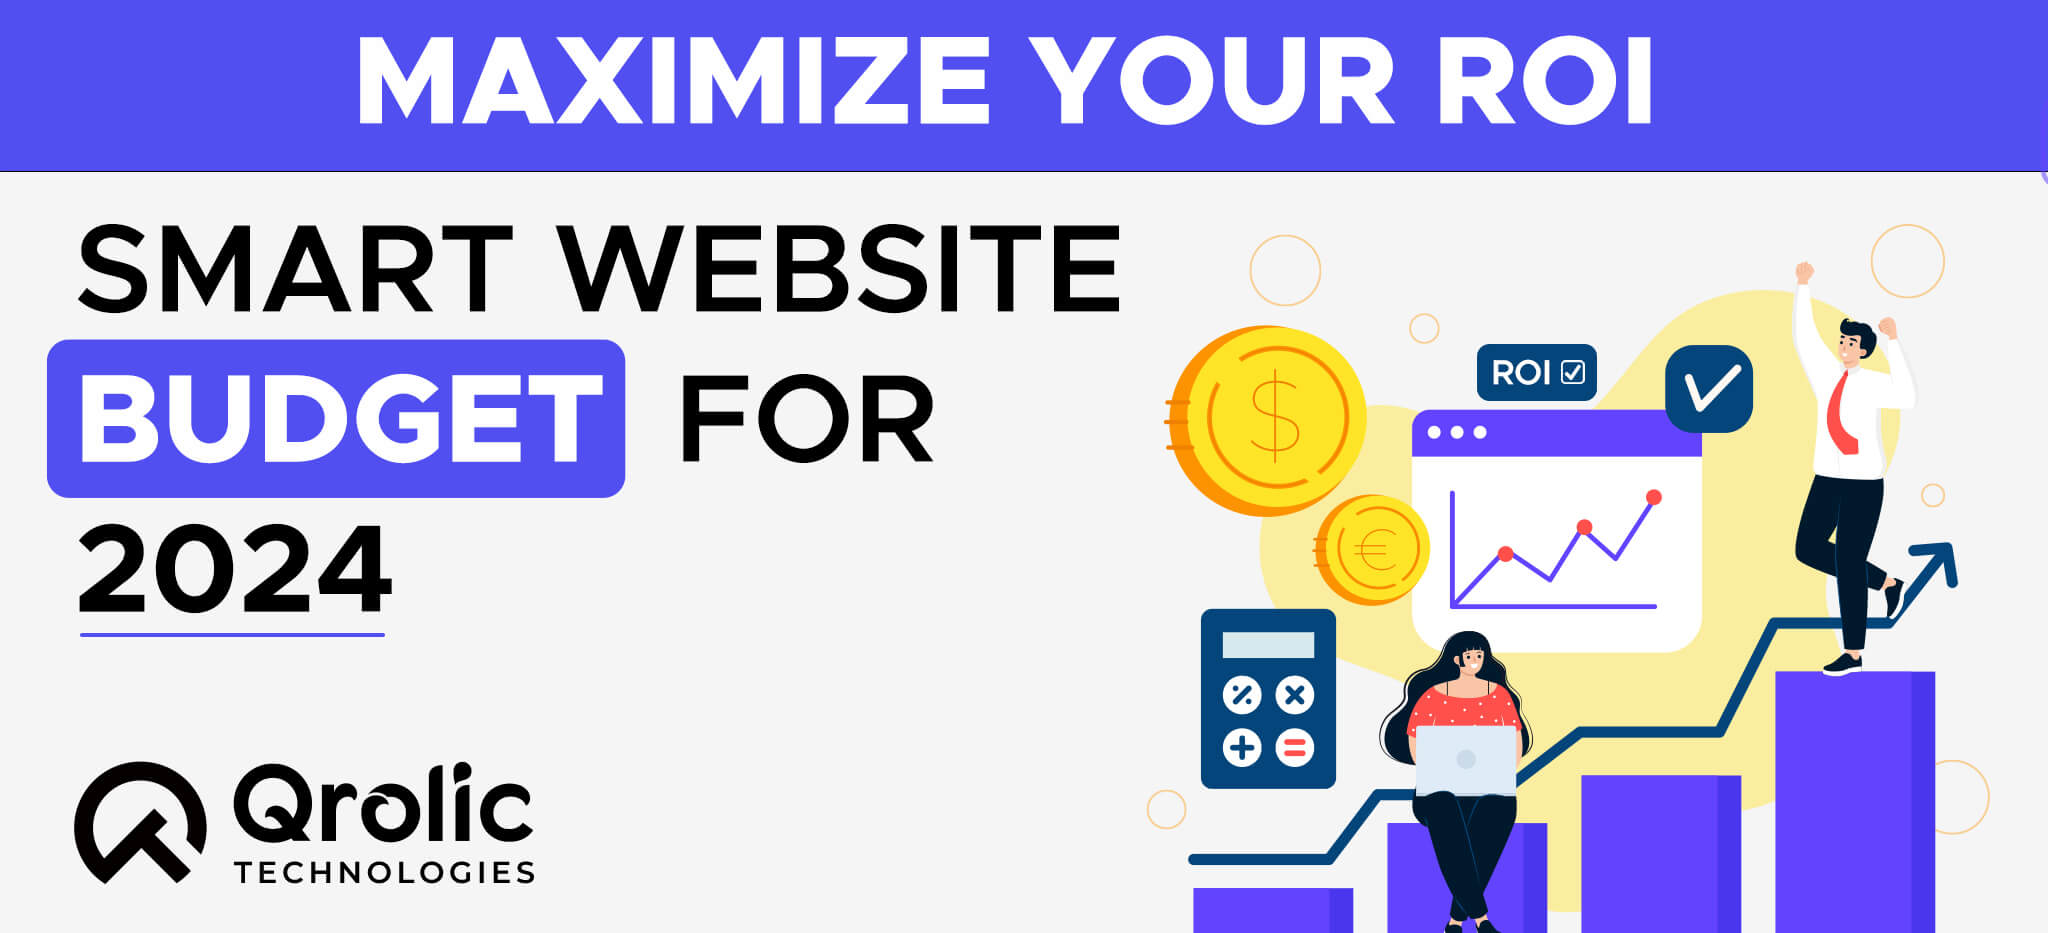 Maximize Your ROI Smart Website Budget for 2024